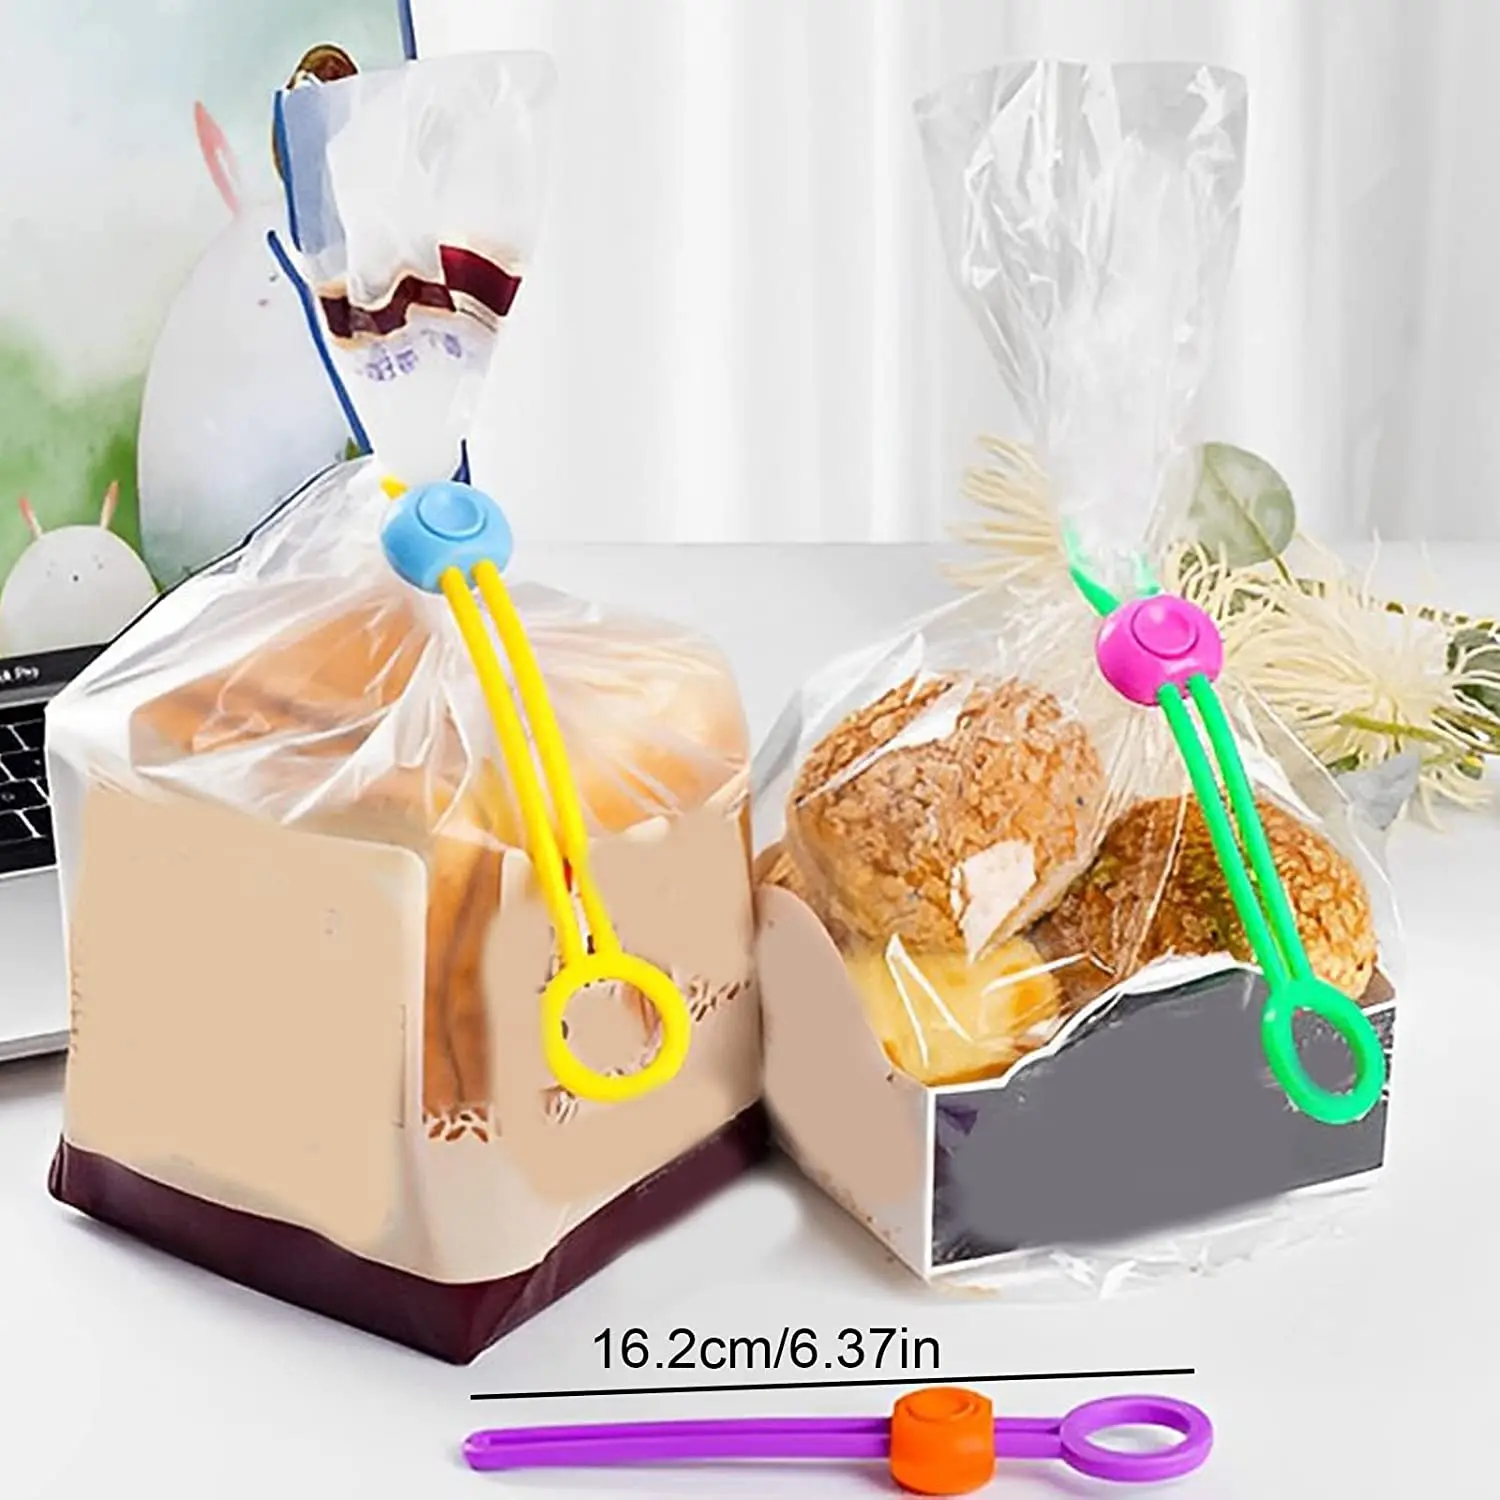 Upgraded Snack Bag Sealing Strap, Food Bag Clips, Multi-Purpose Sealer,  Reusable Cable Ties for Home Kitchen Office